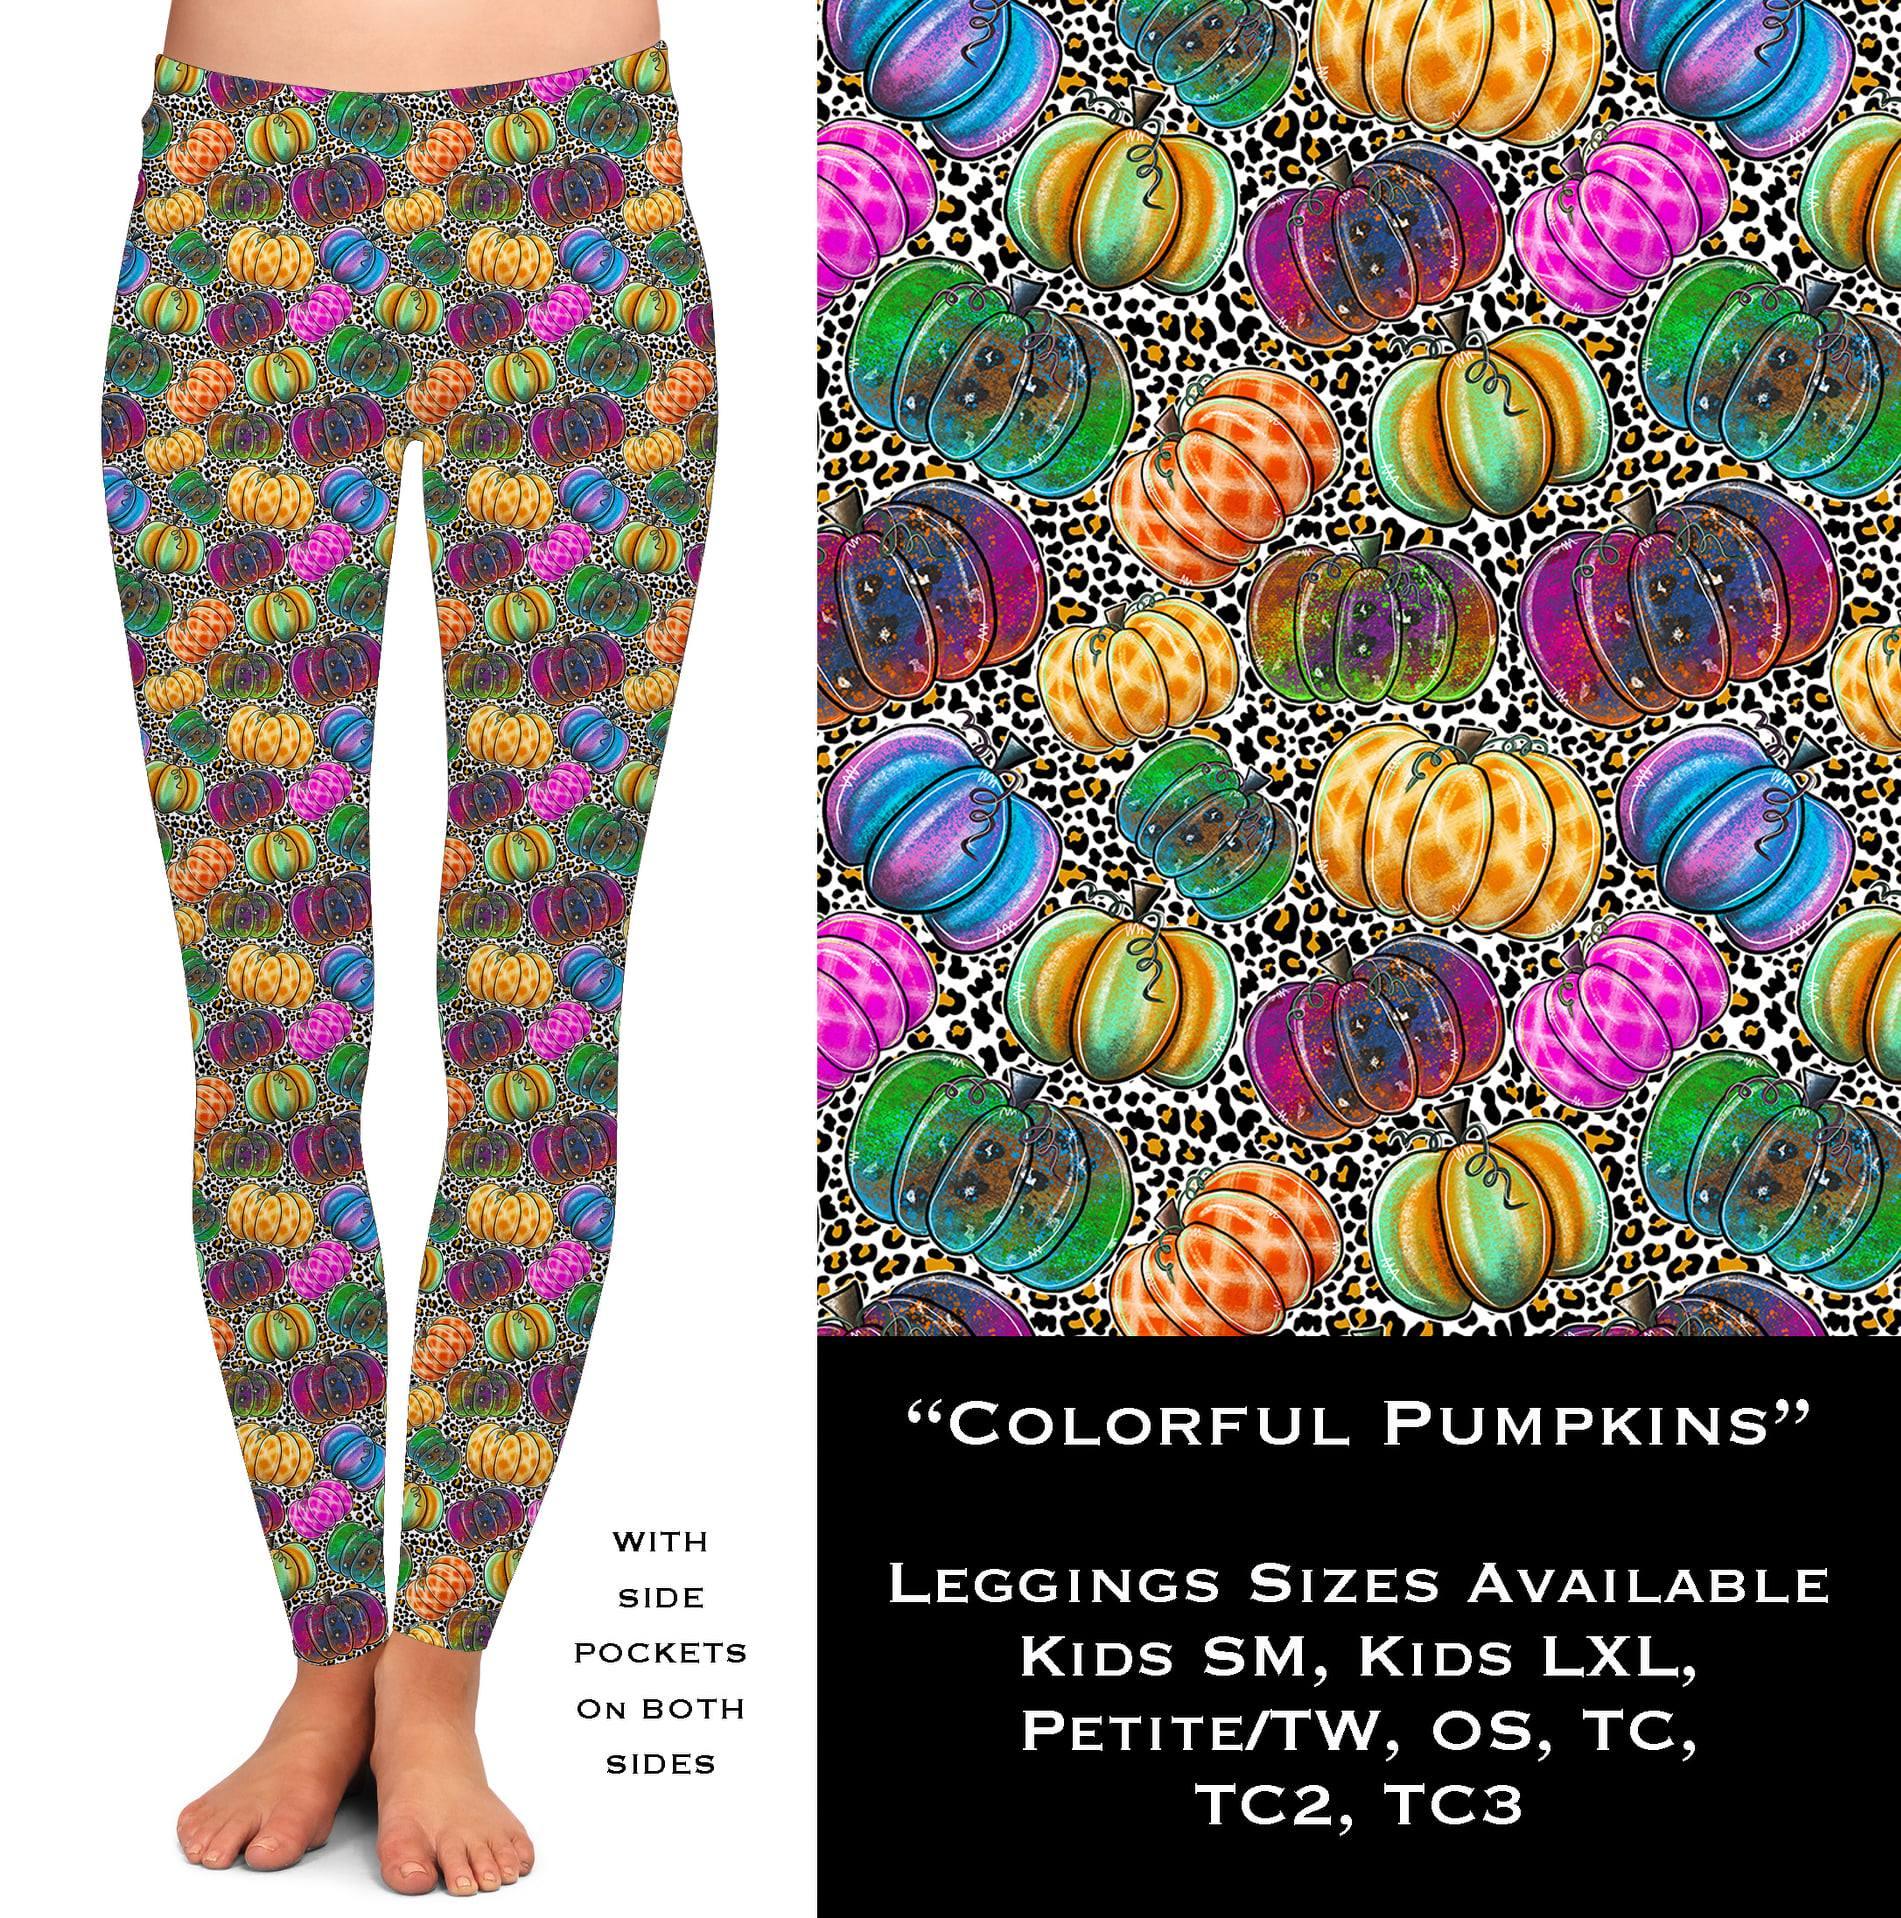 Colorful Pumpkins - Leggings with Pockets - That’s So Fletch Boutique 